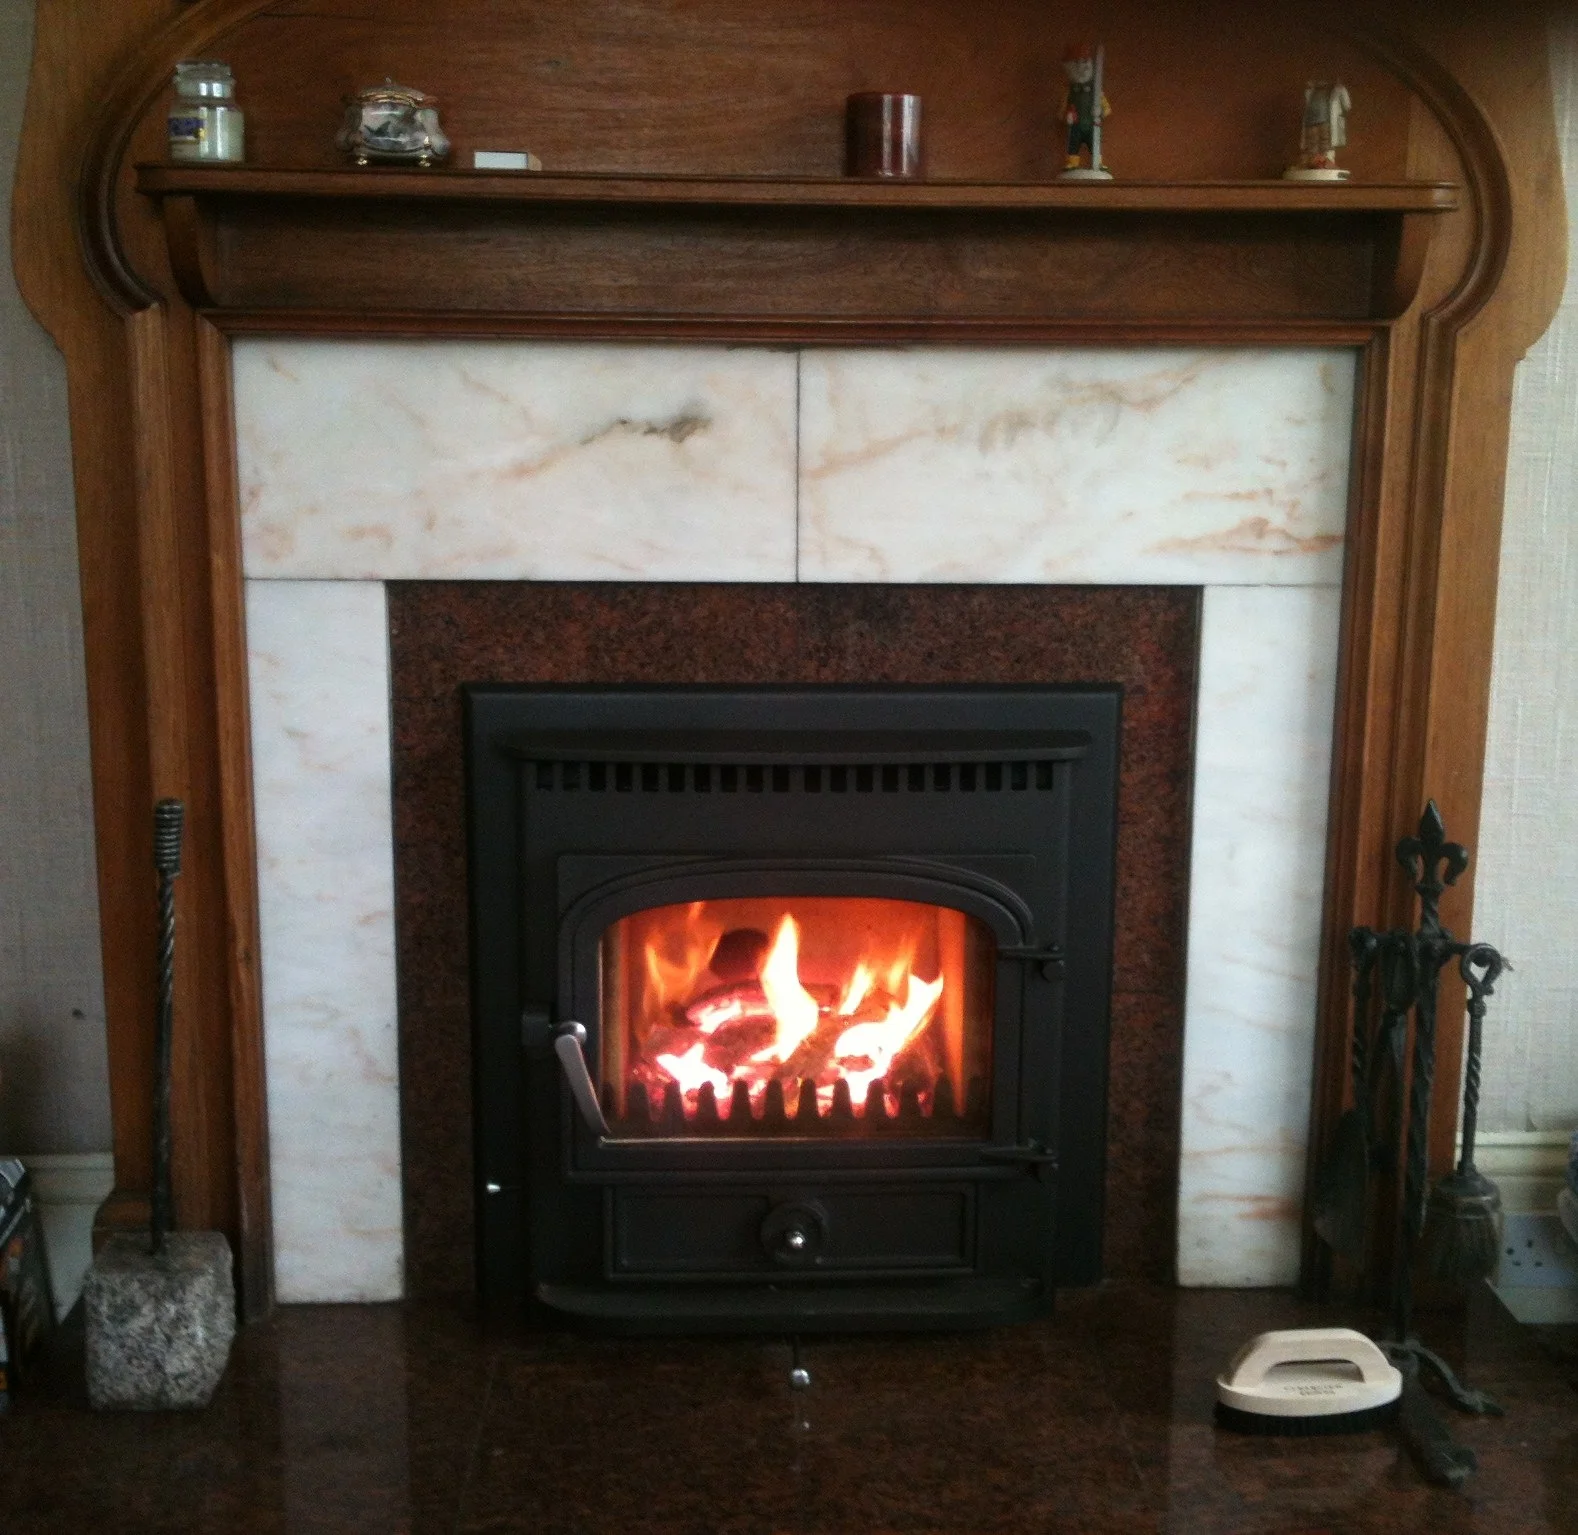 Inset in fireplace